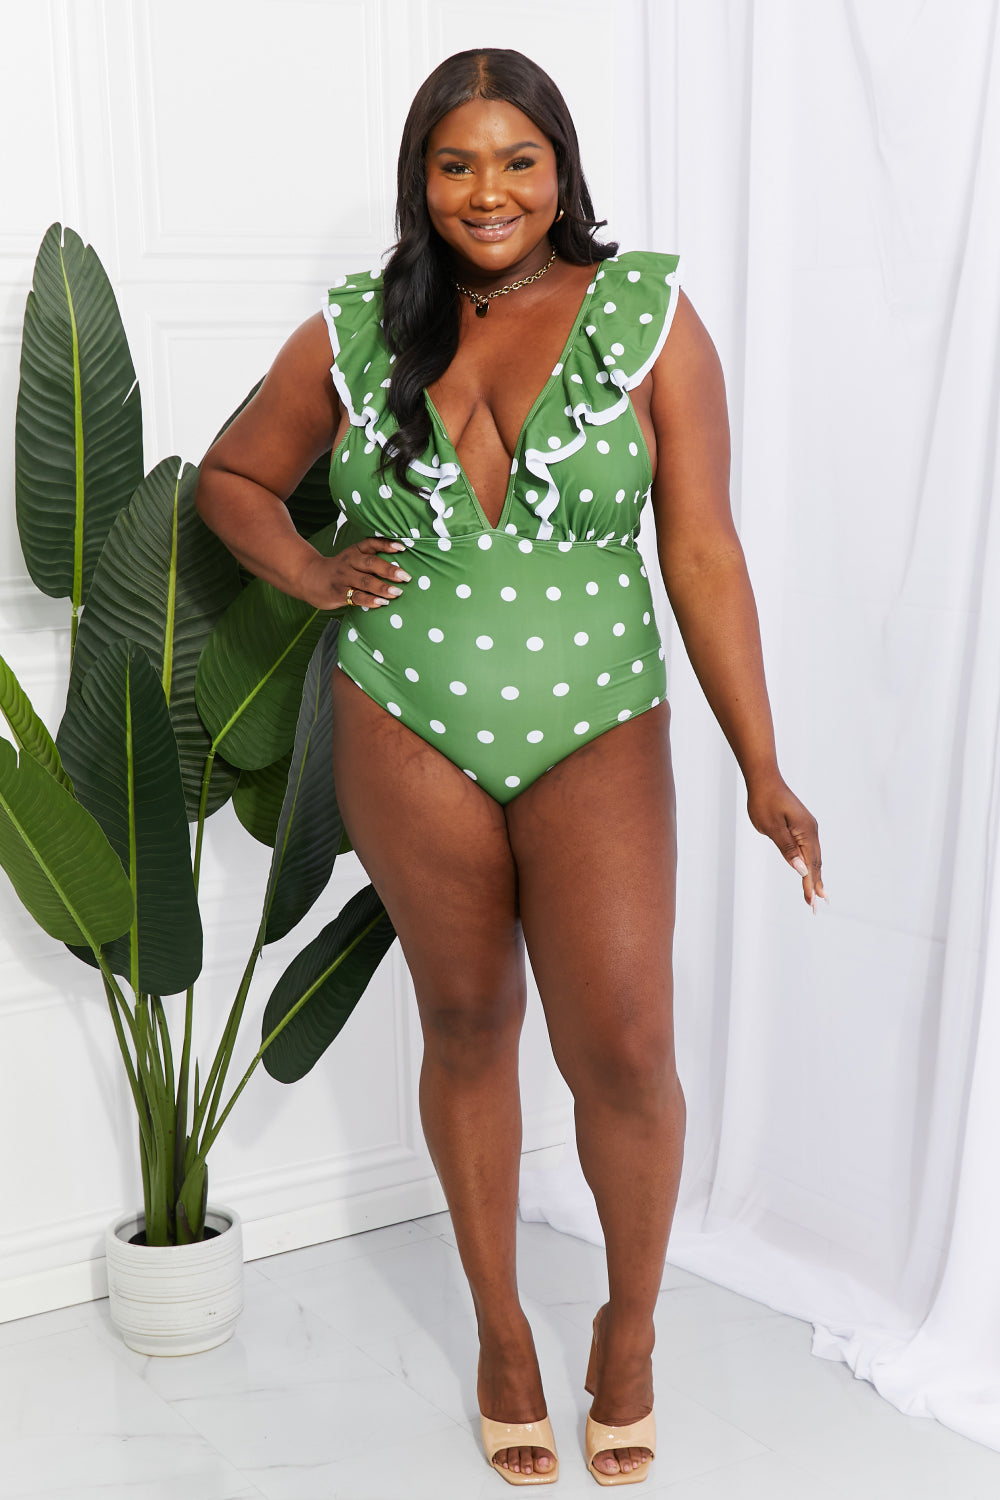 Marina West Swim Moonlit Dip Ruffle Plunge Swimsuit in Mid Green - Online Only